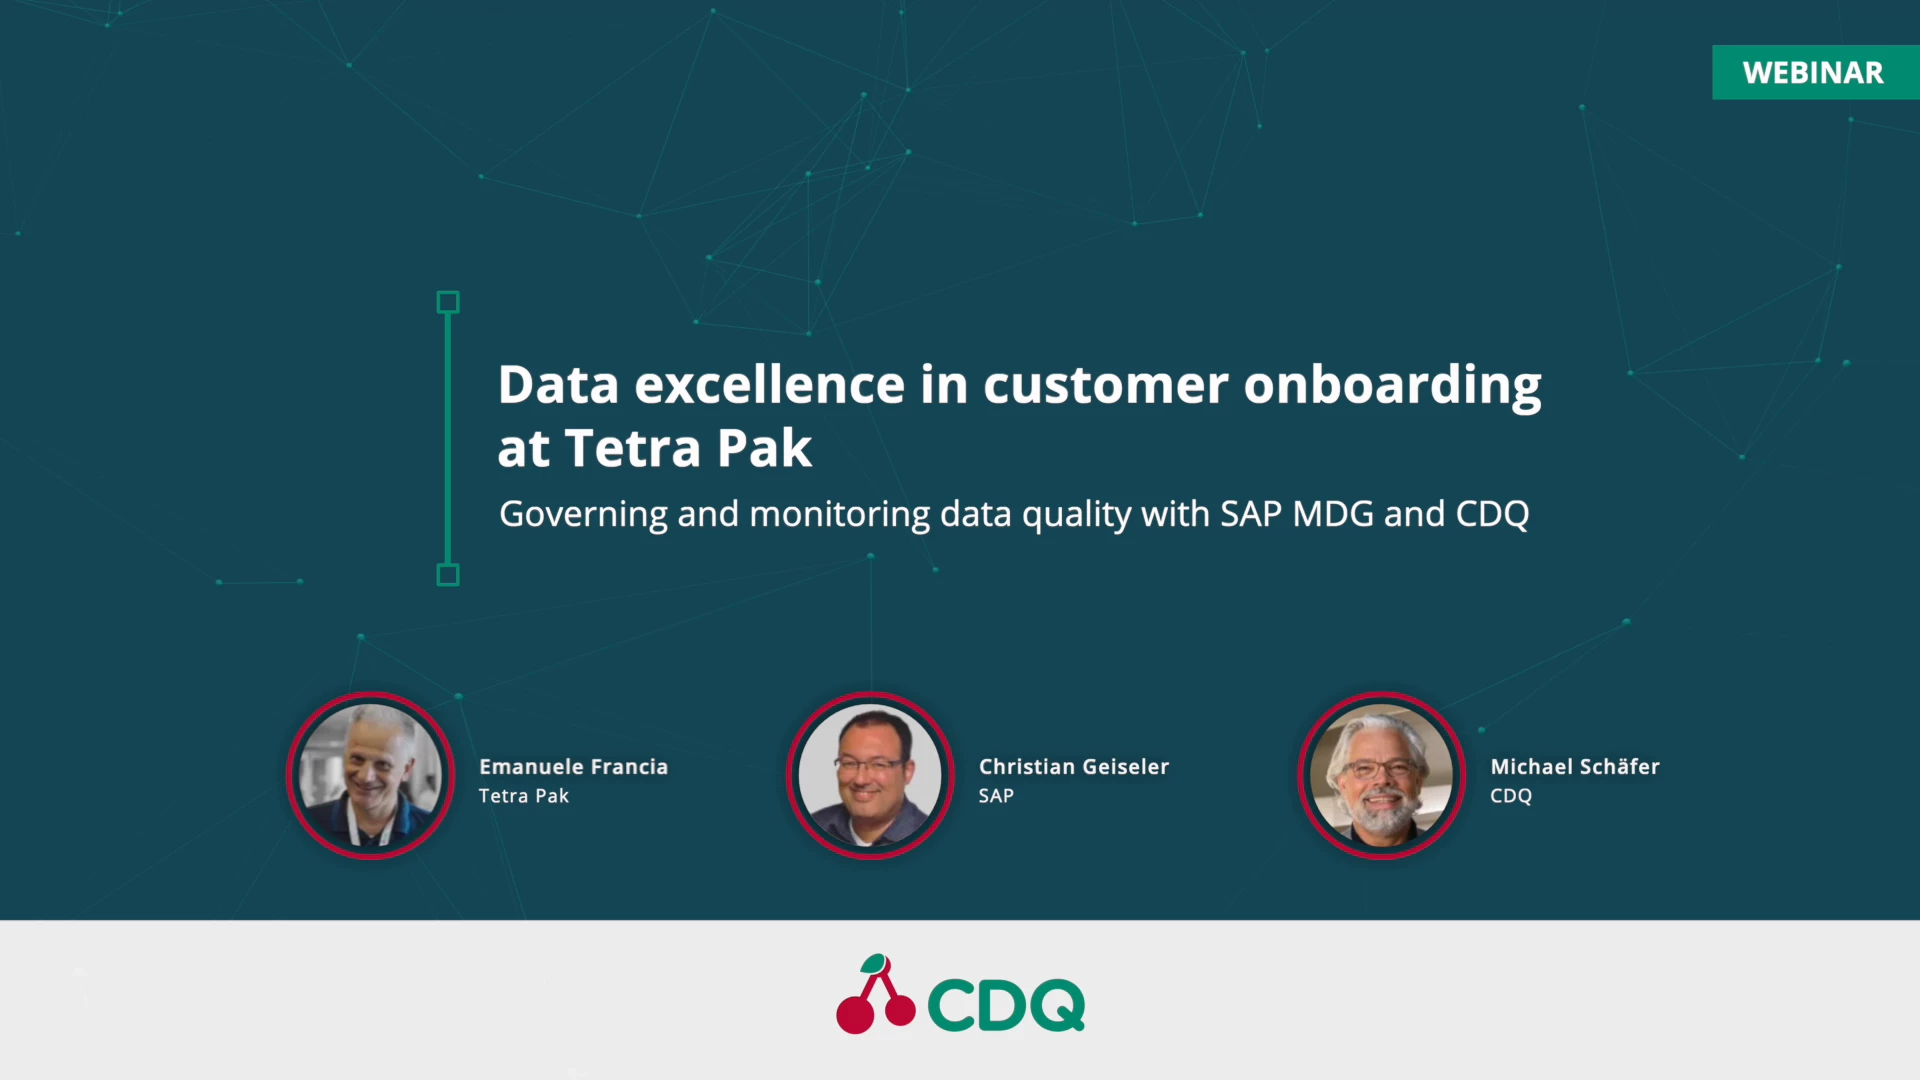 Data excellence in customer onboarding at Tetra Pak